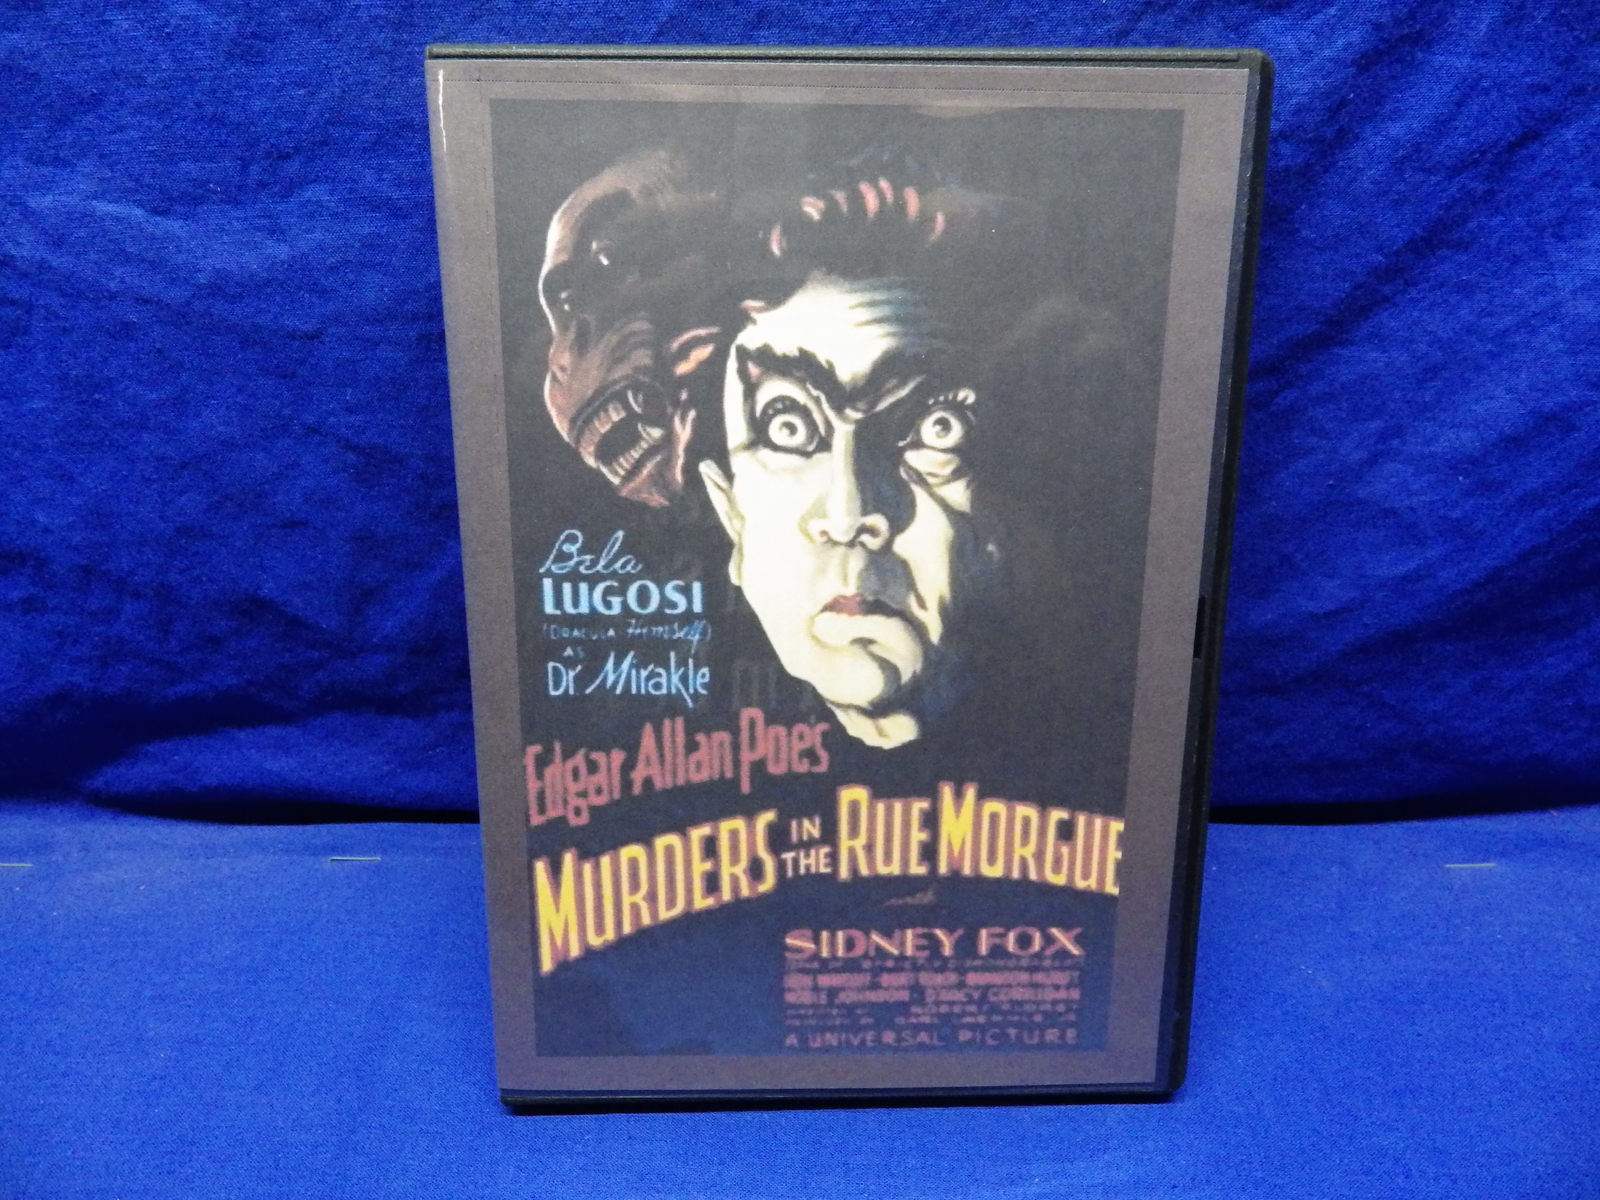 Classic Horror DVD: Universal Pictures "Murders In The Rue Morgue" (1932) - $13.95